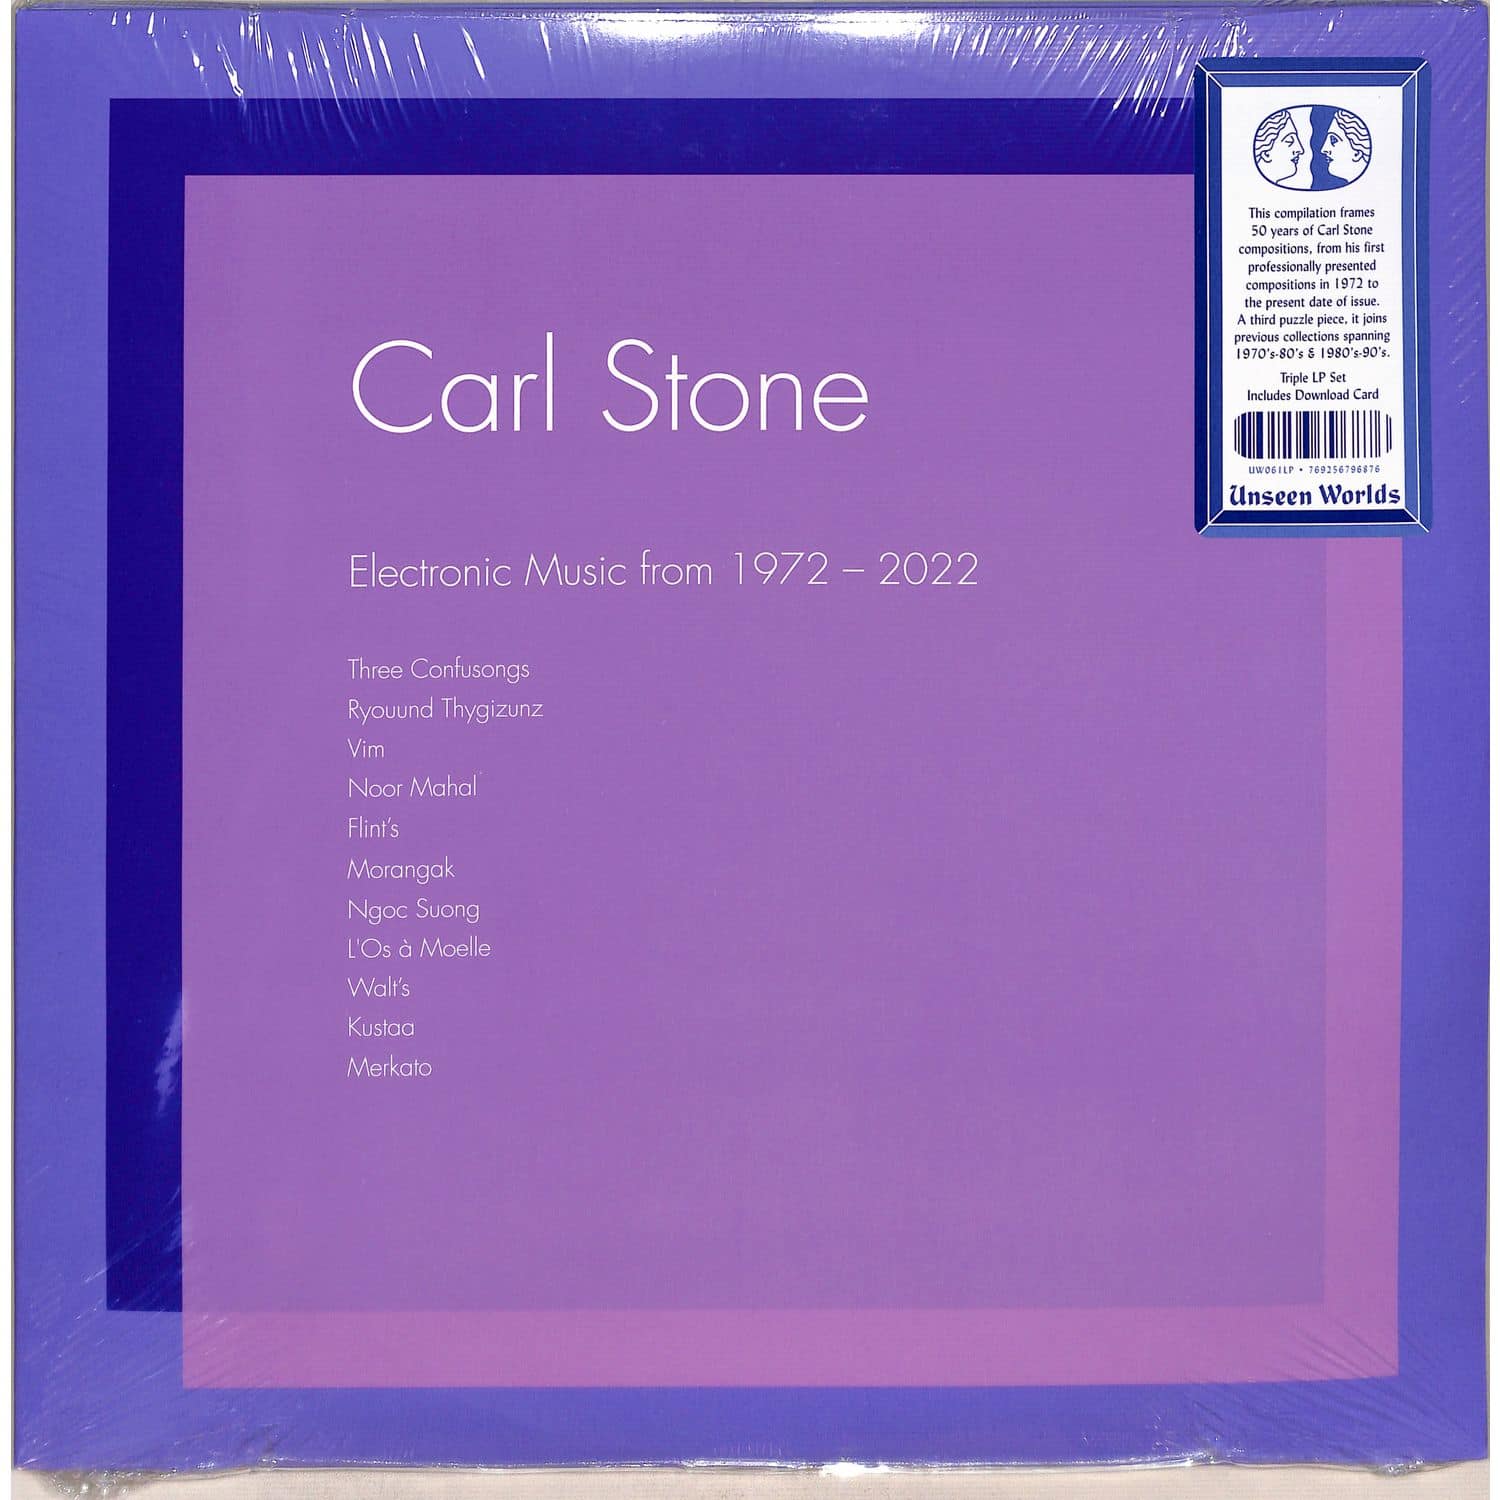 Carl Stone - ELECTRONIC MUSIC FROM 1972-2022 